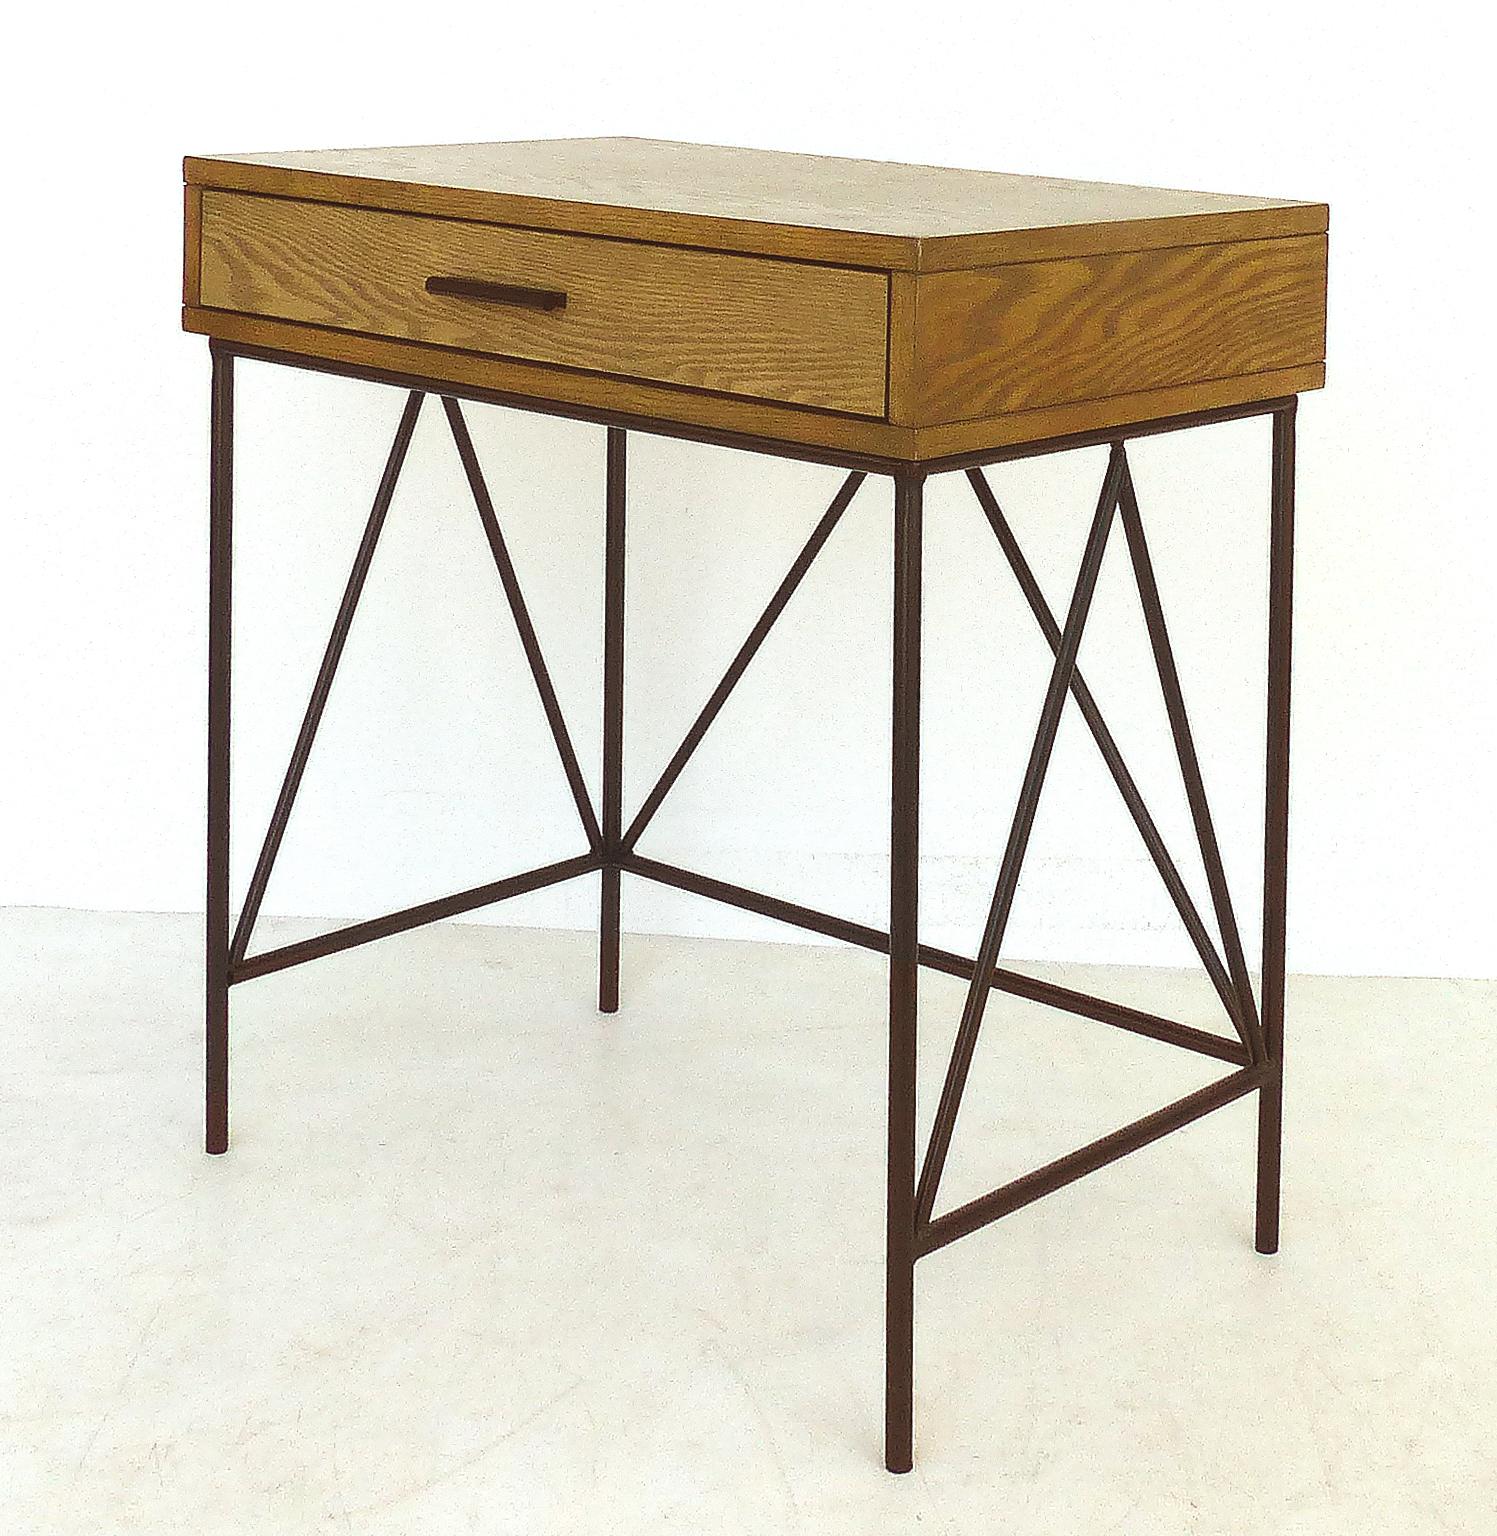 Contemporary nightstand side tables with iron bases, pair

Offered for sale is a contemporary pair of heavily grained nightstands or side tables with wrought iron bases and stretchers. These tables have a great look that will complement and